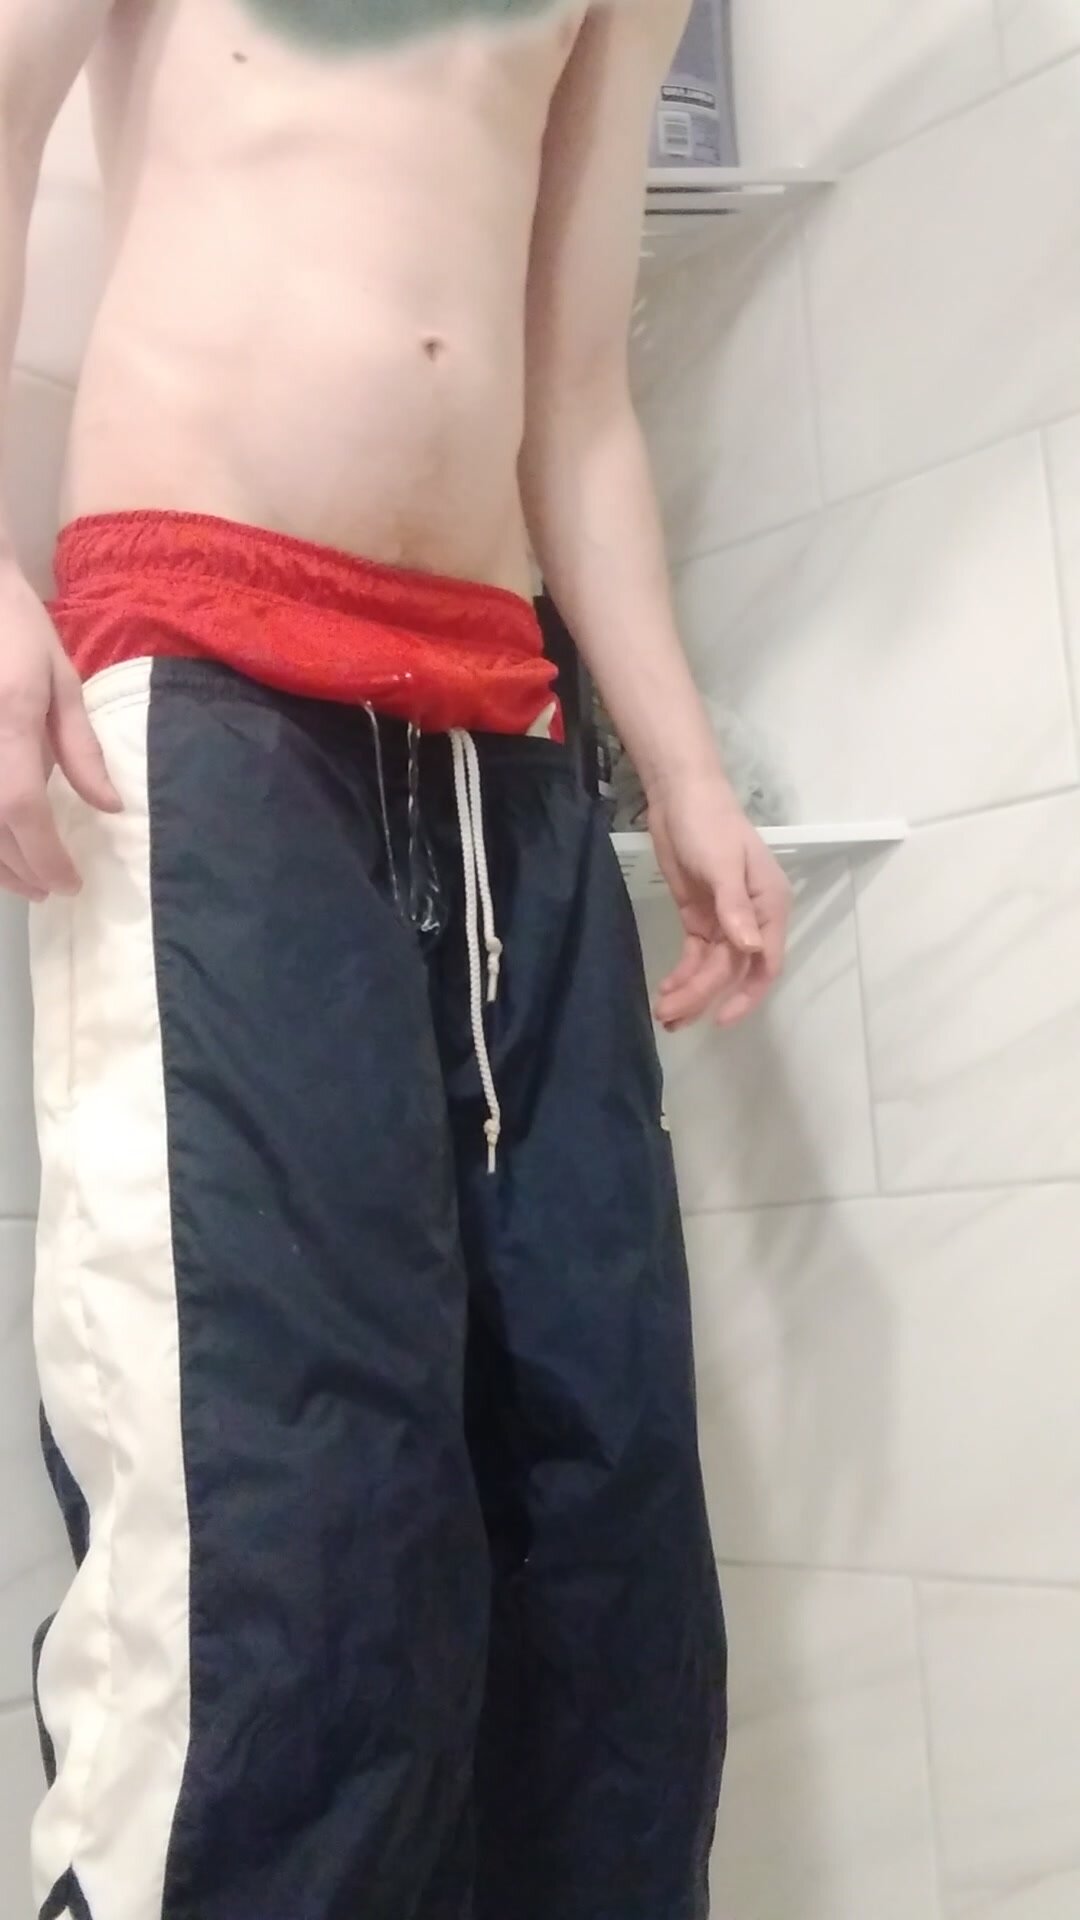 Pissing my shorts and pants